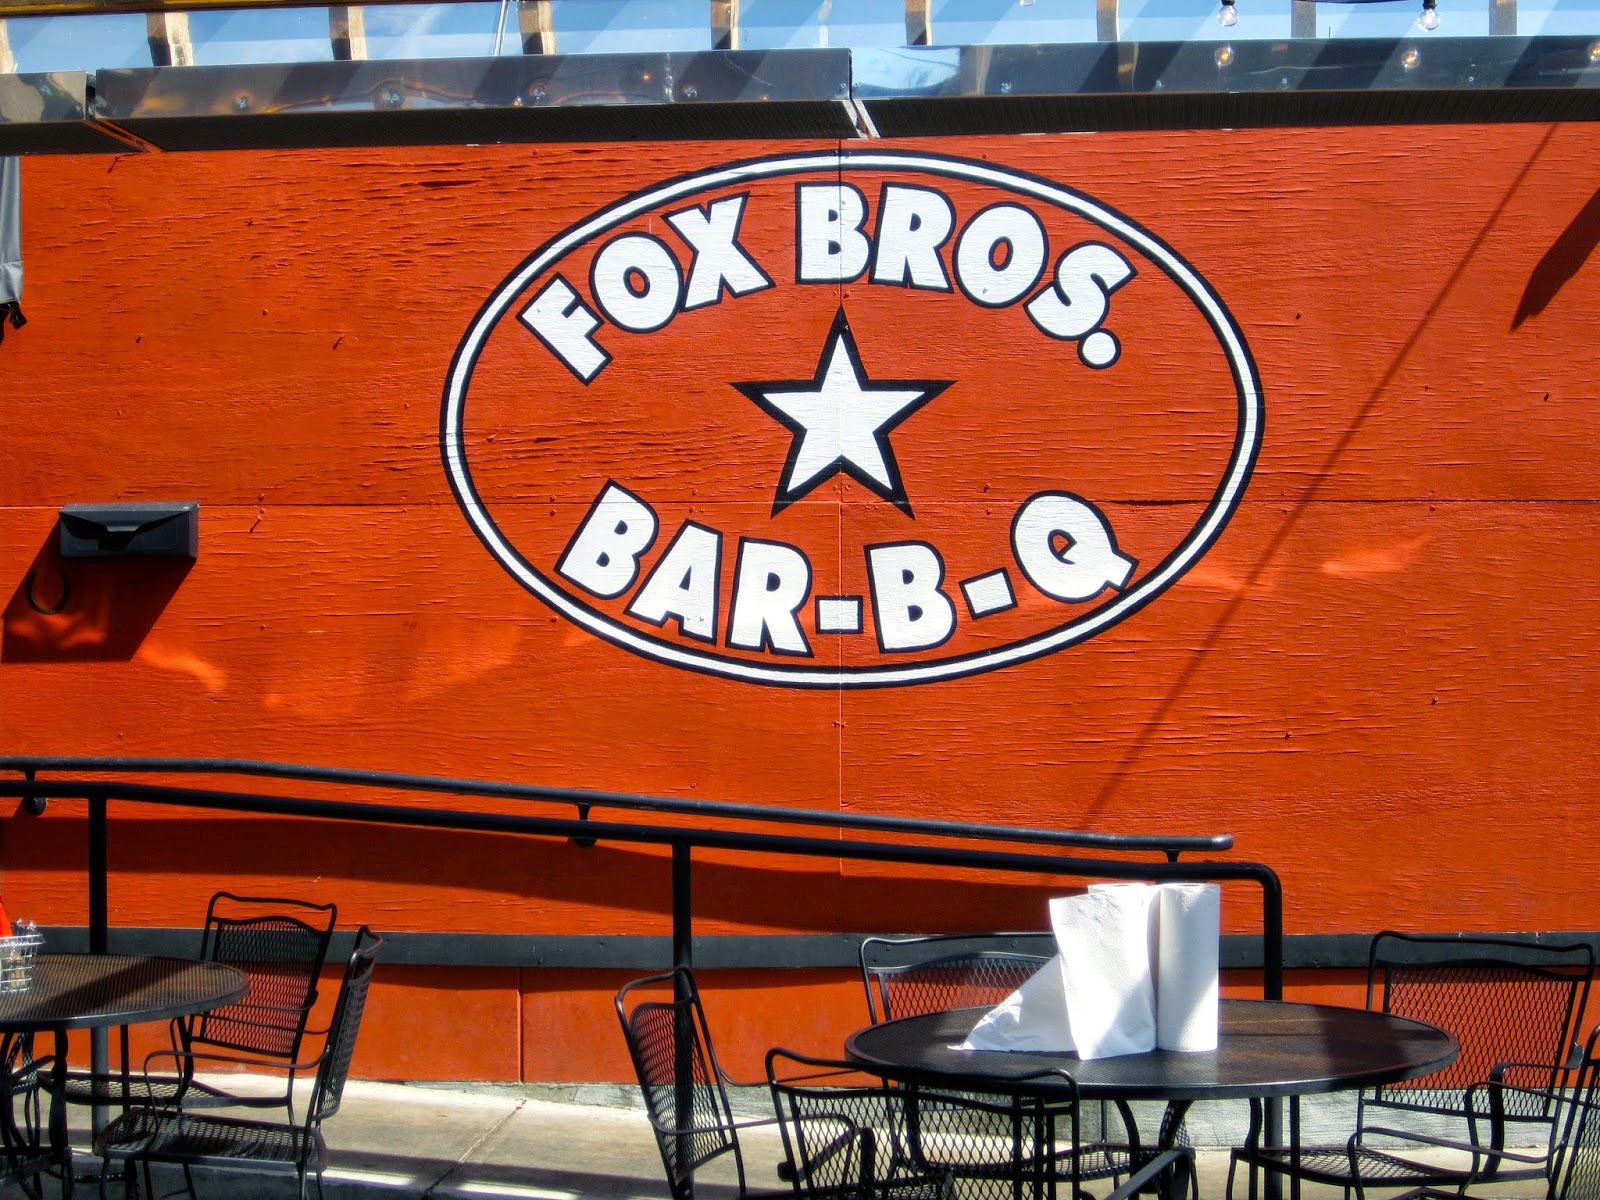 Stroud Is All Over the Place: Fox Brothers and Heirloom - Atlanta BBQ